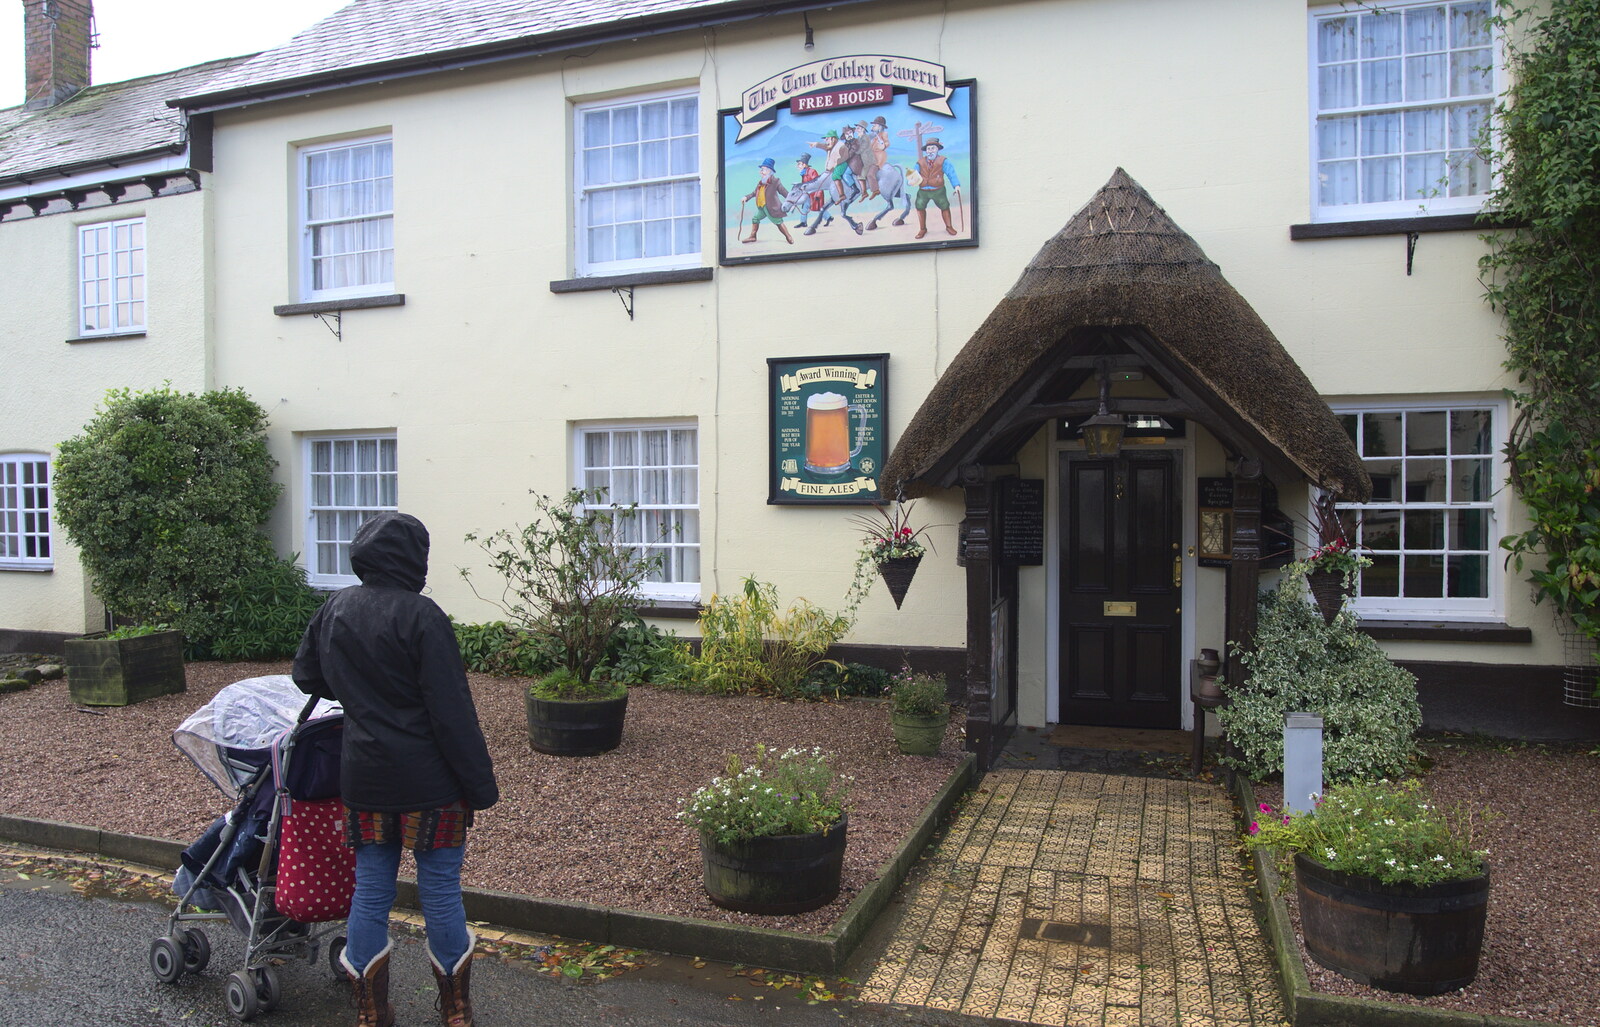 We look glumly at the Tom Cobley, which isn't open from A Few Days in Spreyton, Devon - 26th October 2013